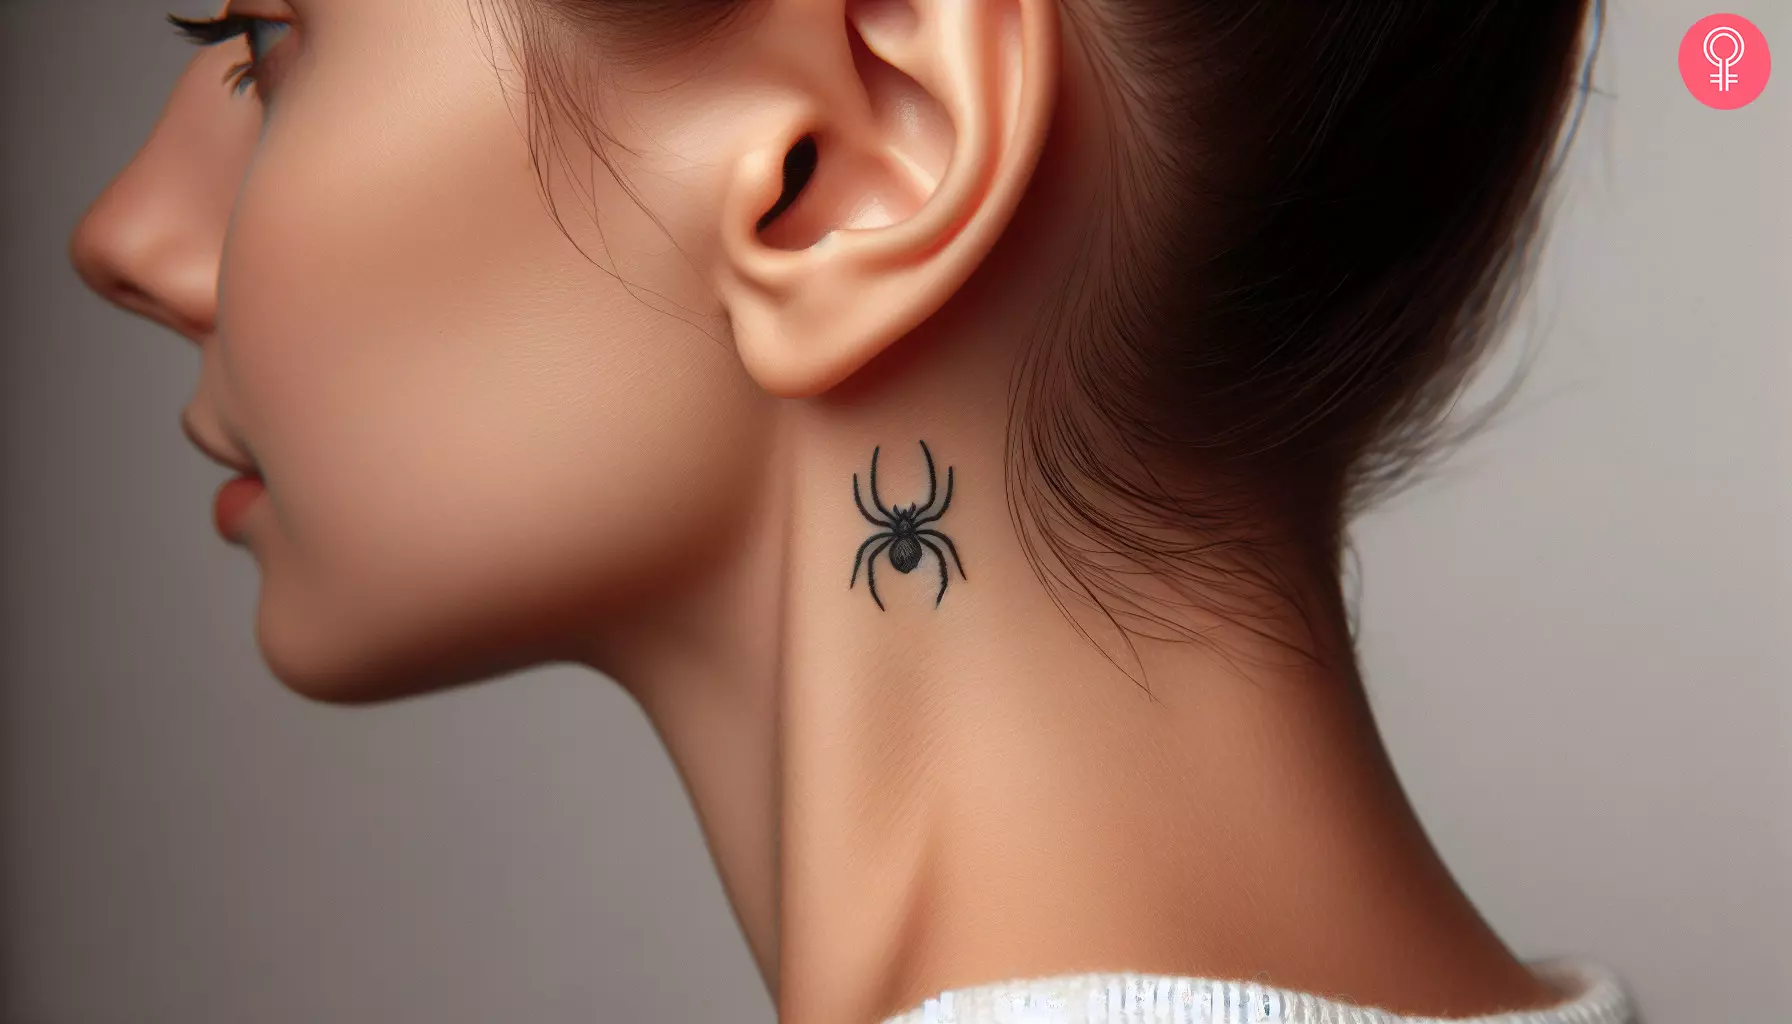 A woman with a spider tattoo behind the ear